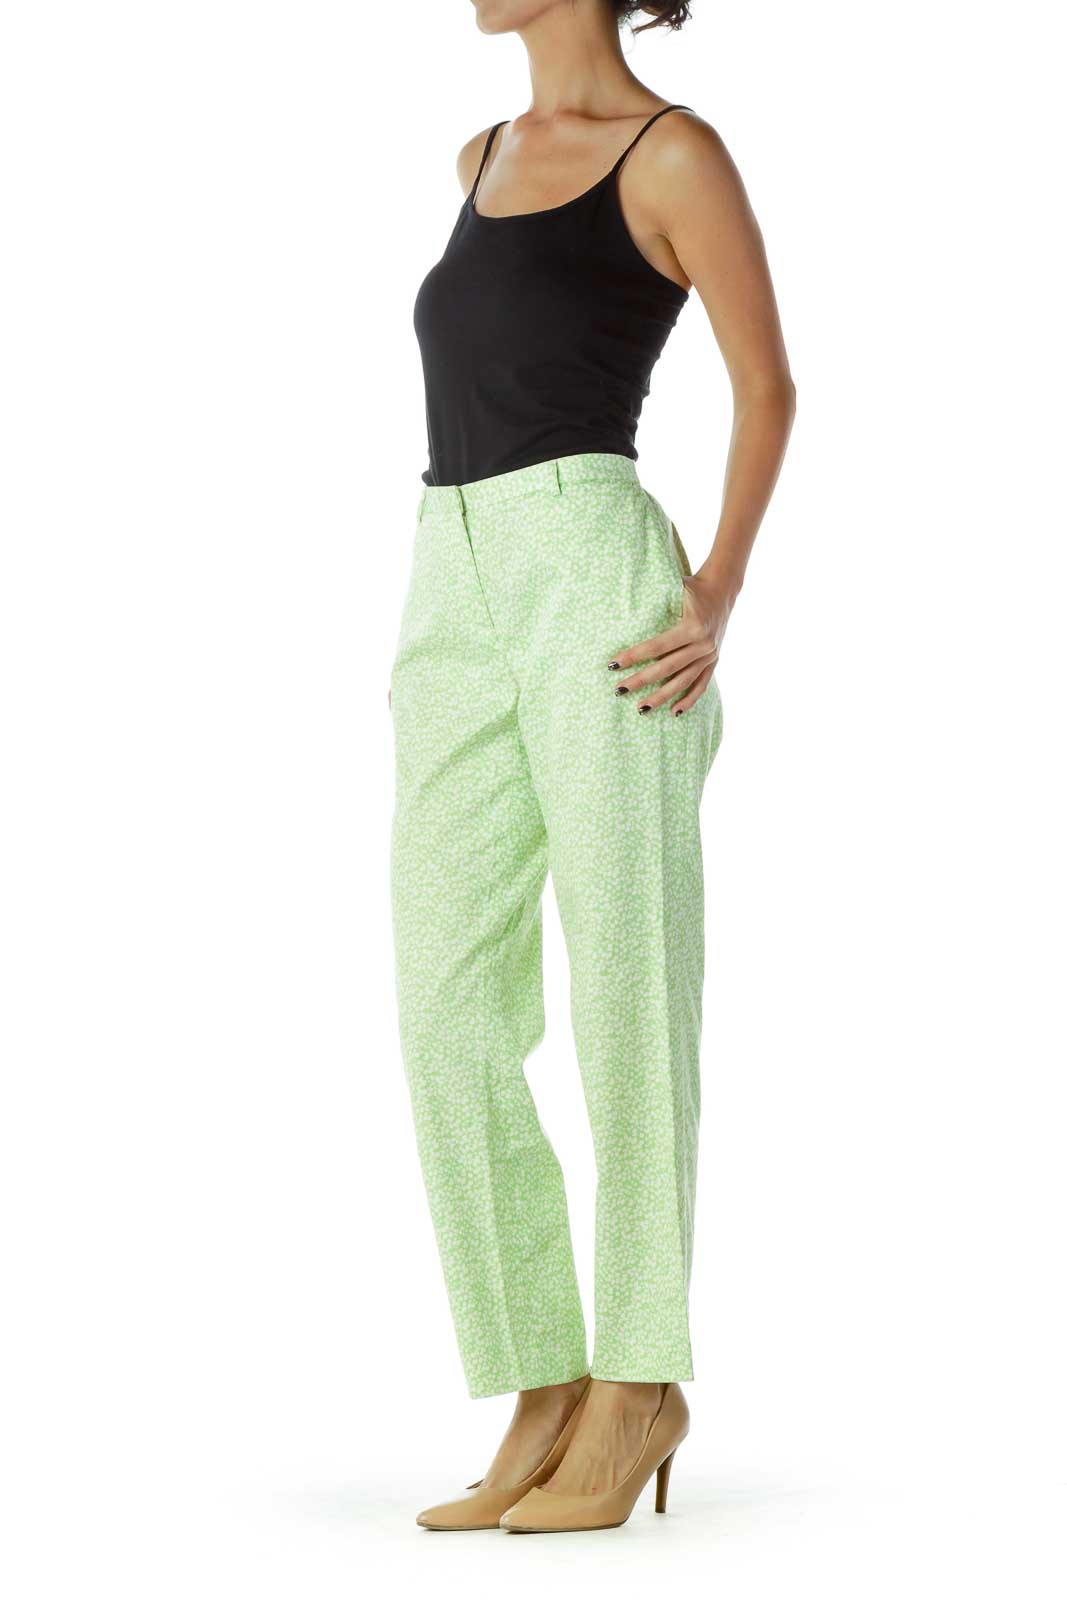 J.Crew Green Athletic Pants for Women